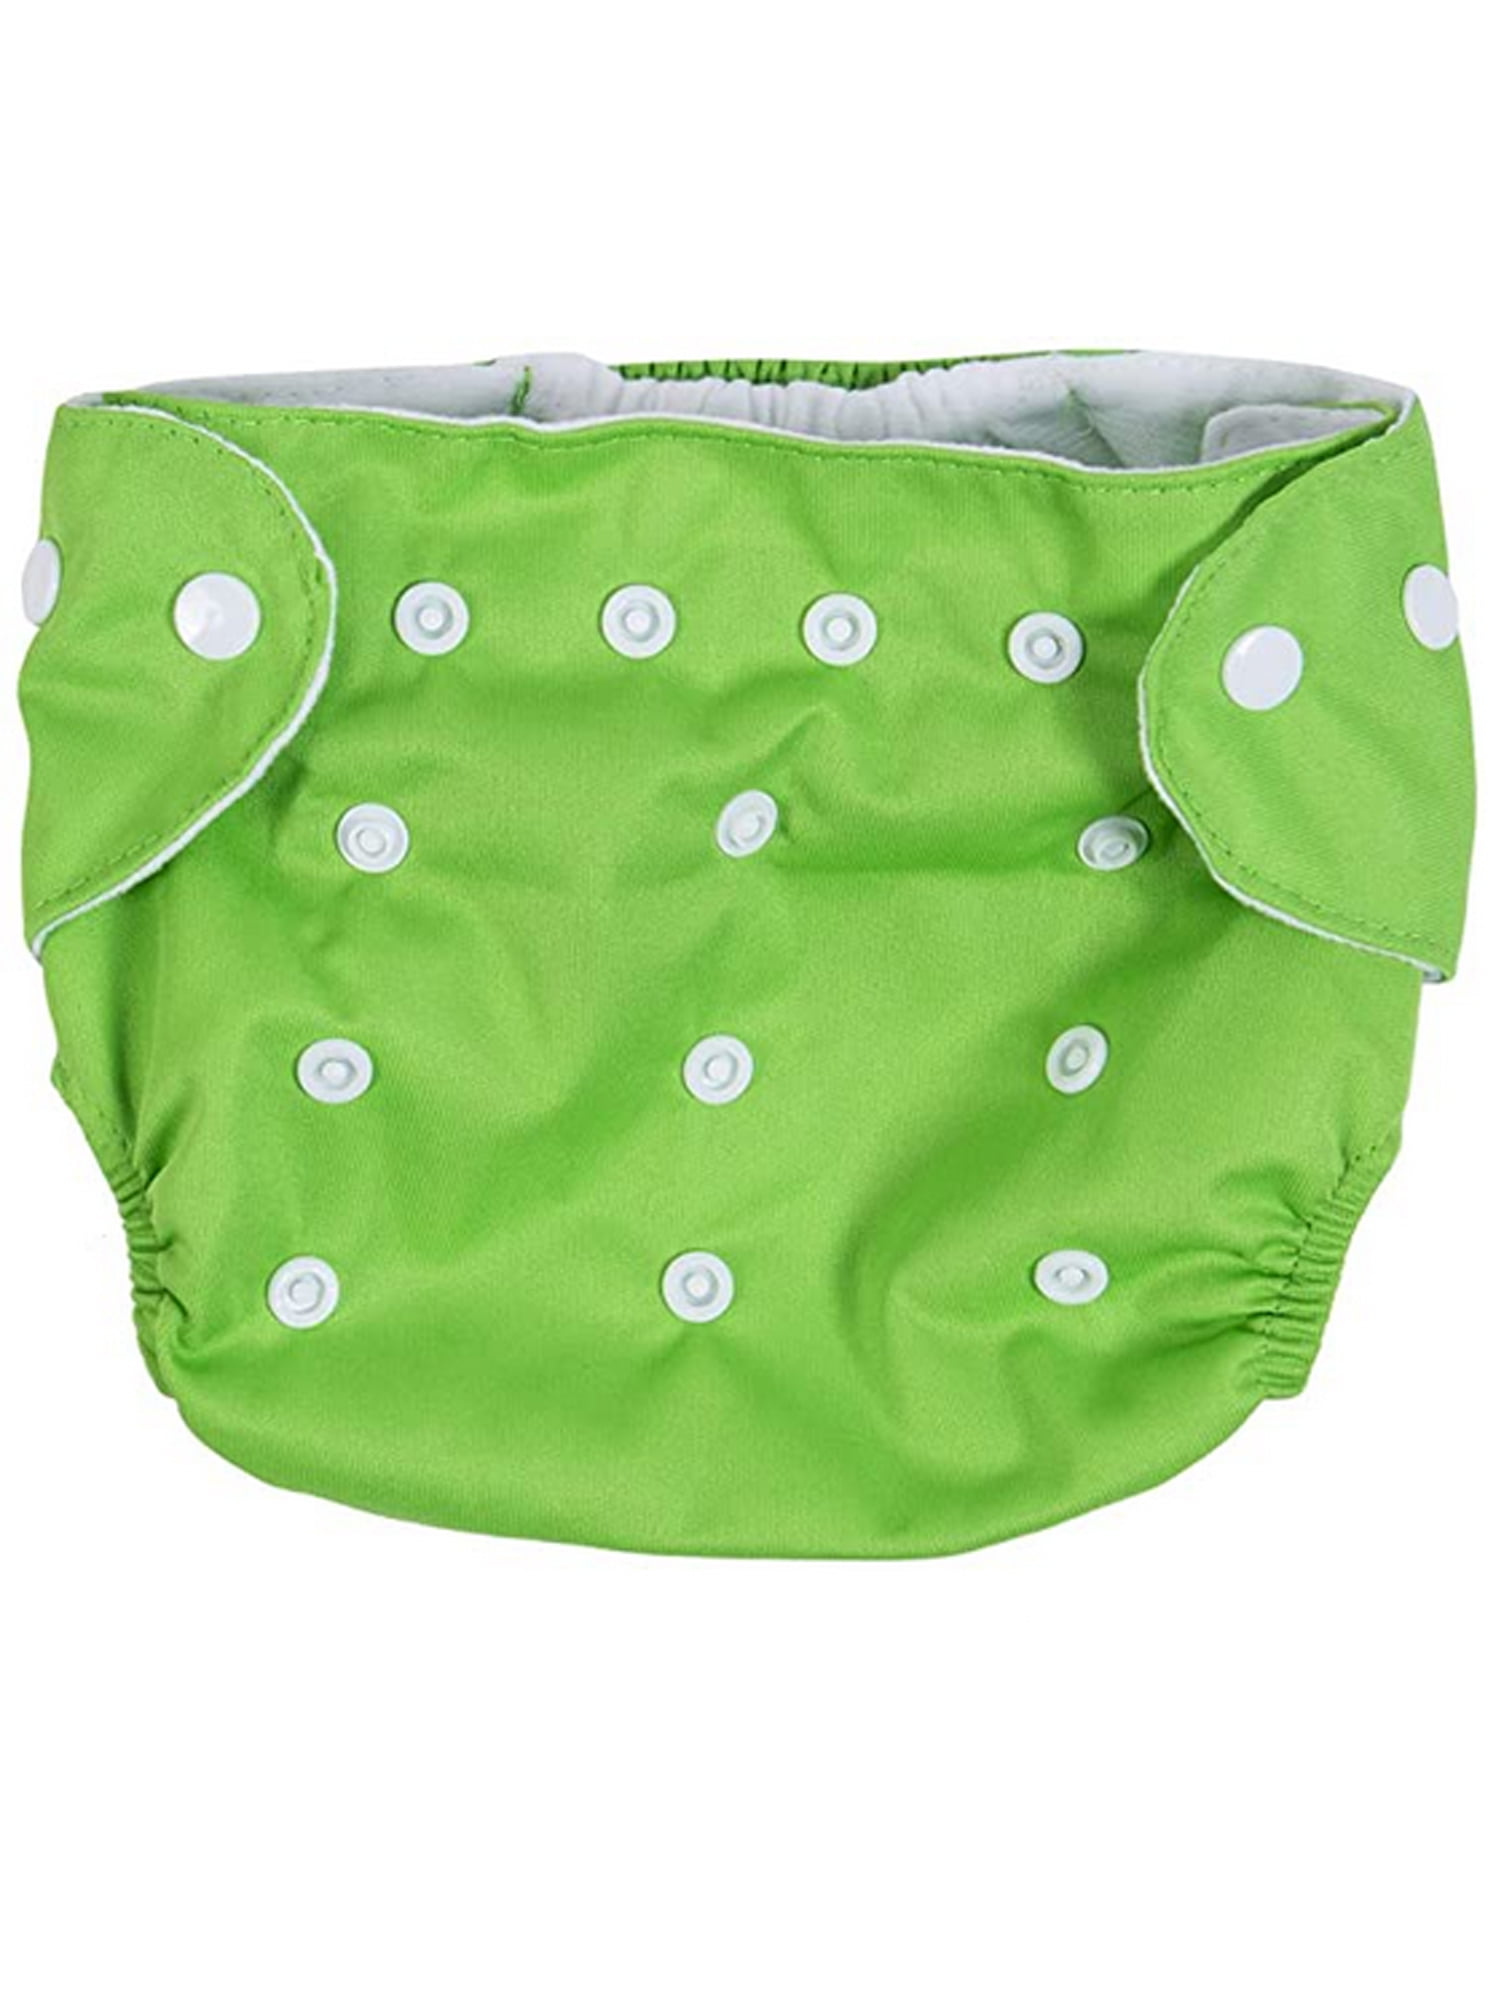 Adjustable Reusable Lot Baby Kids Boy Girls Washable Cloth Diaper Nappies One